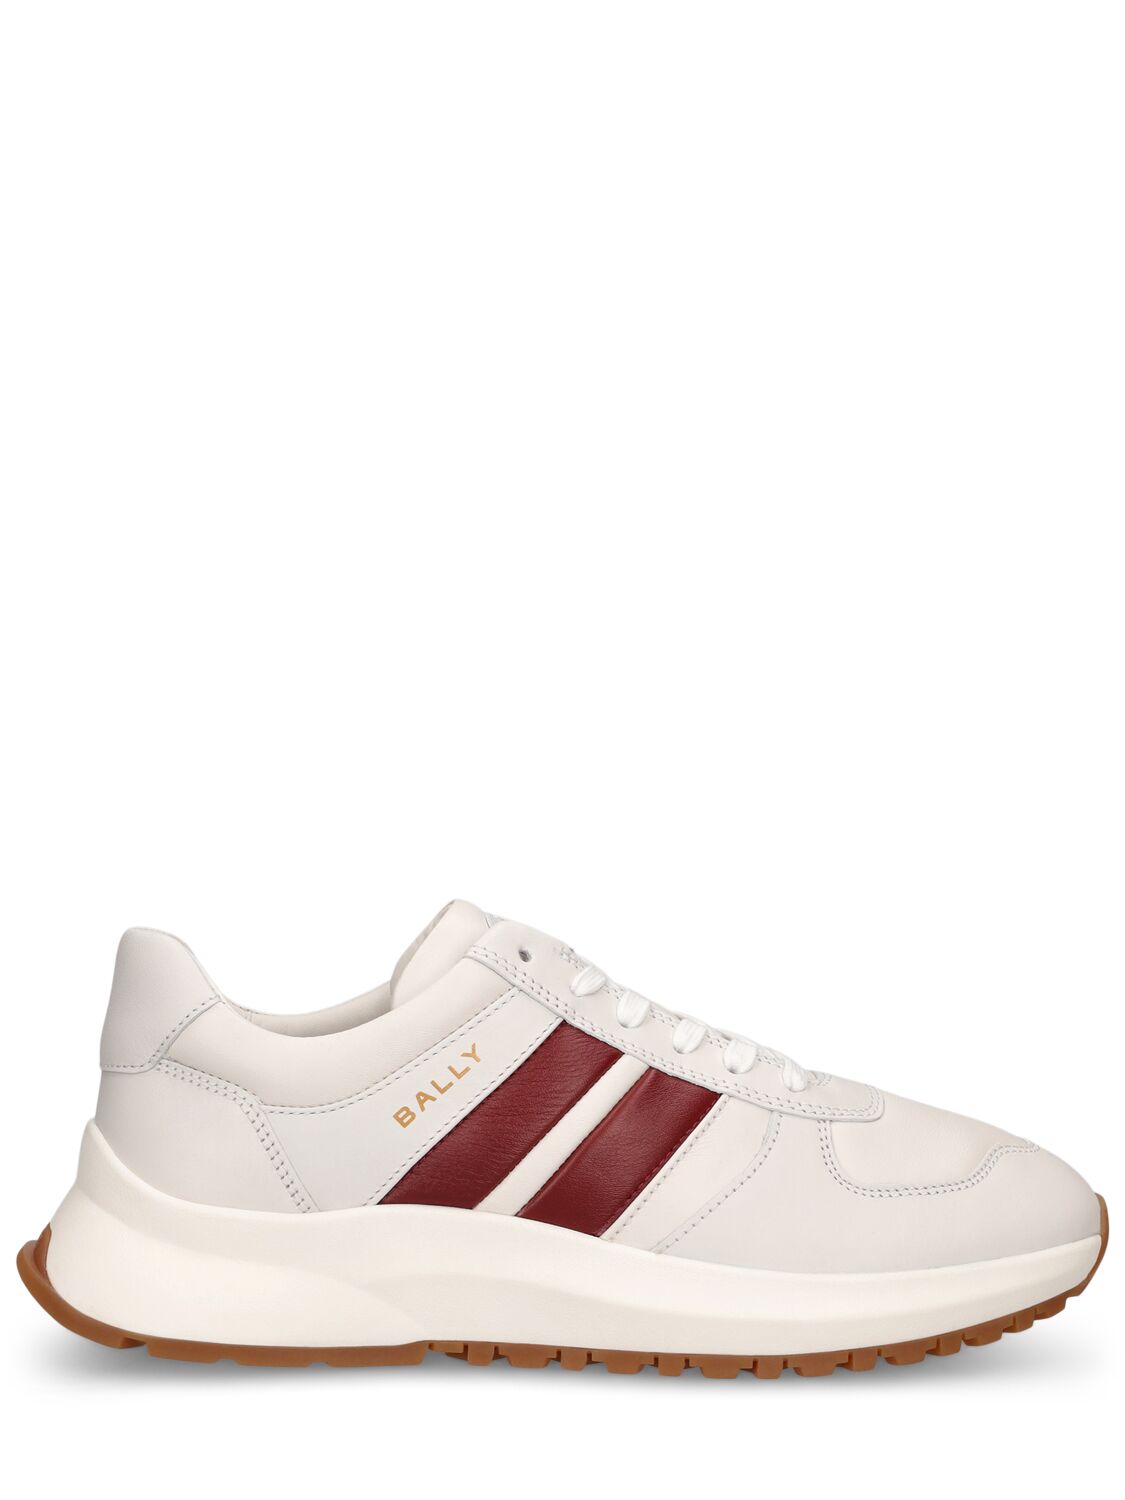 BALLY DARSYL LEATHER LOW SNEAKERS